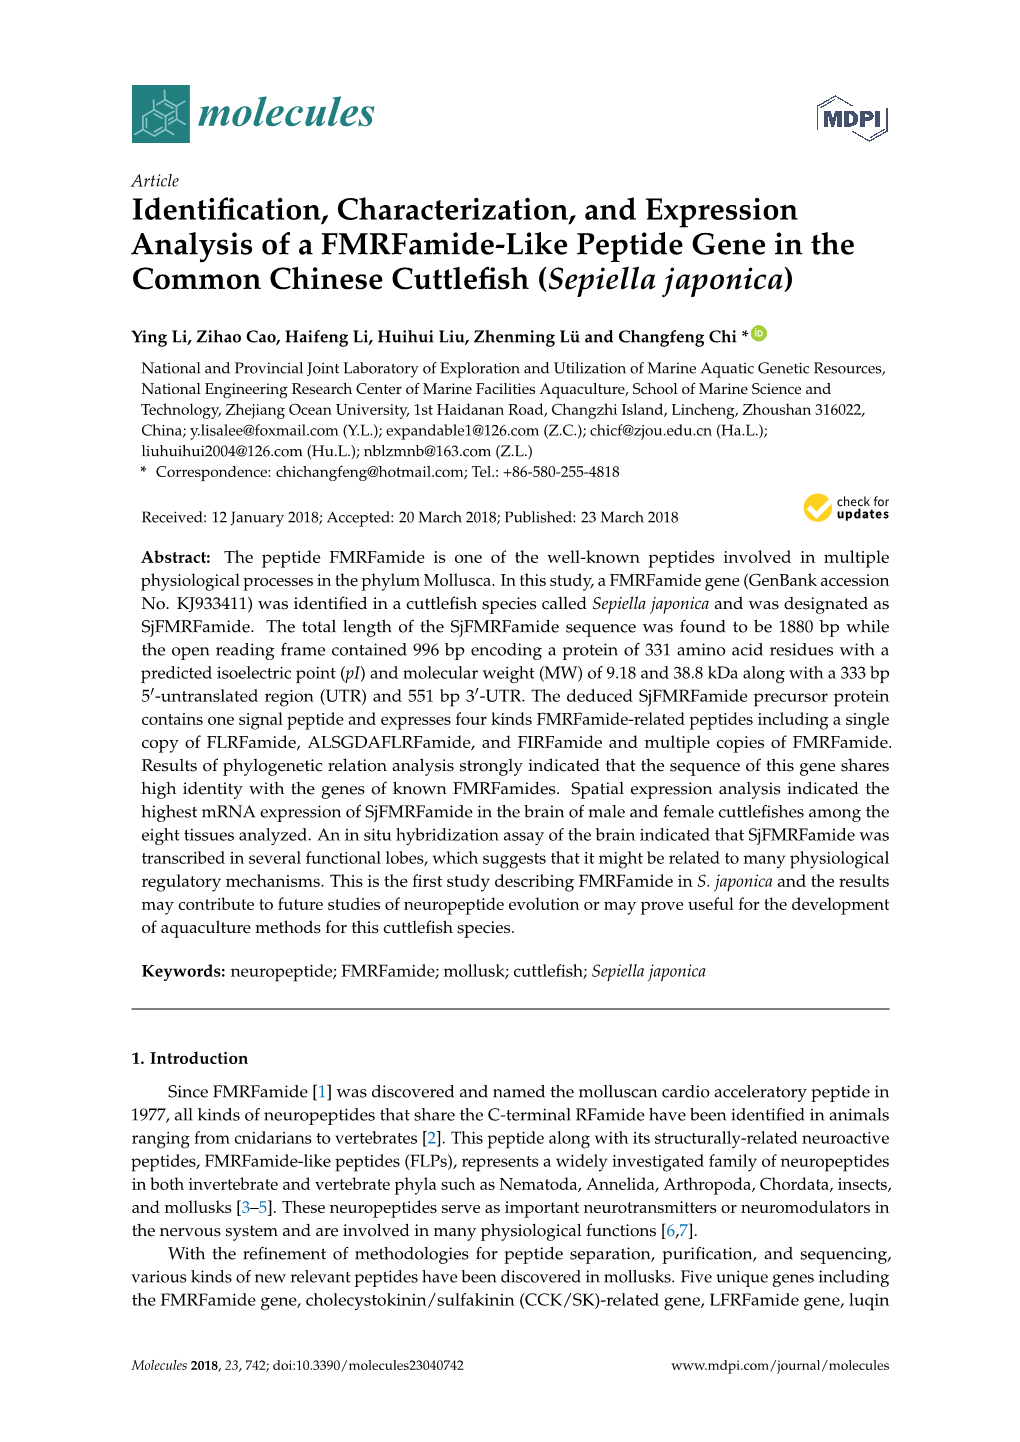 Identification, Characterization, and Expression Analysis of a Fmrfamide-Like Peptide Gene in the Common Chinese Cuttlefish